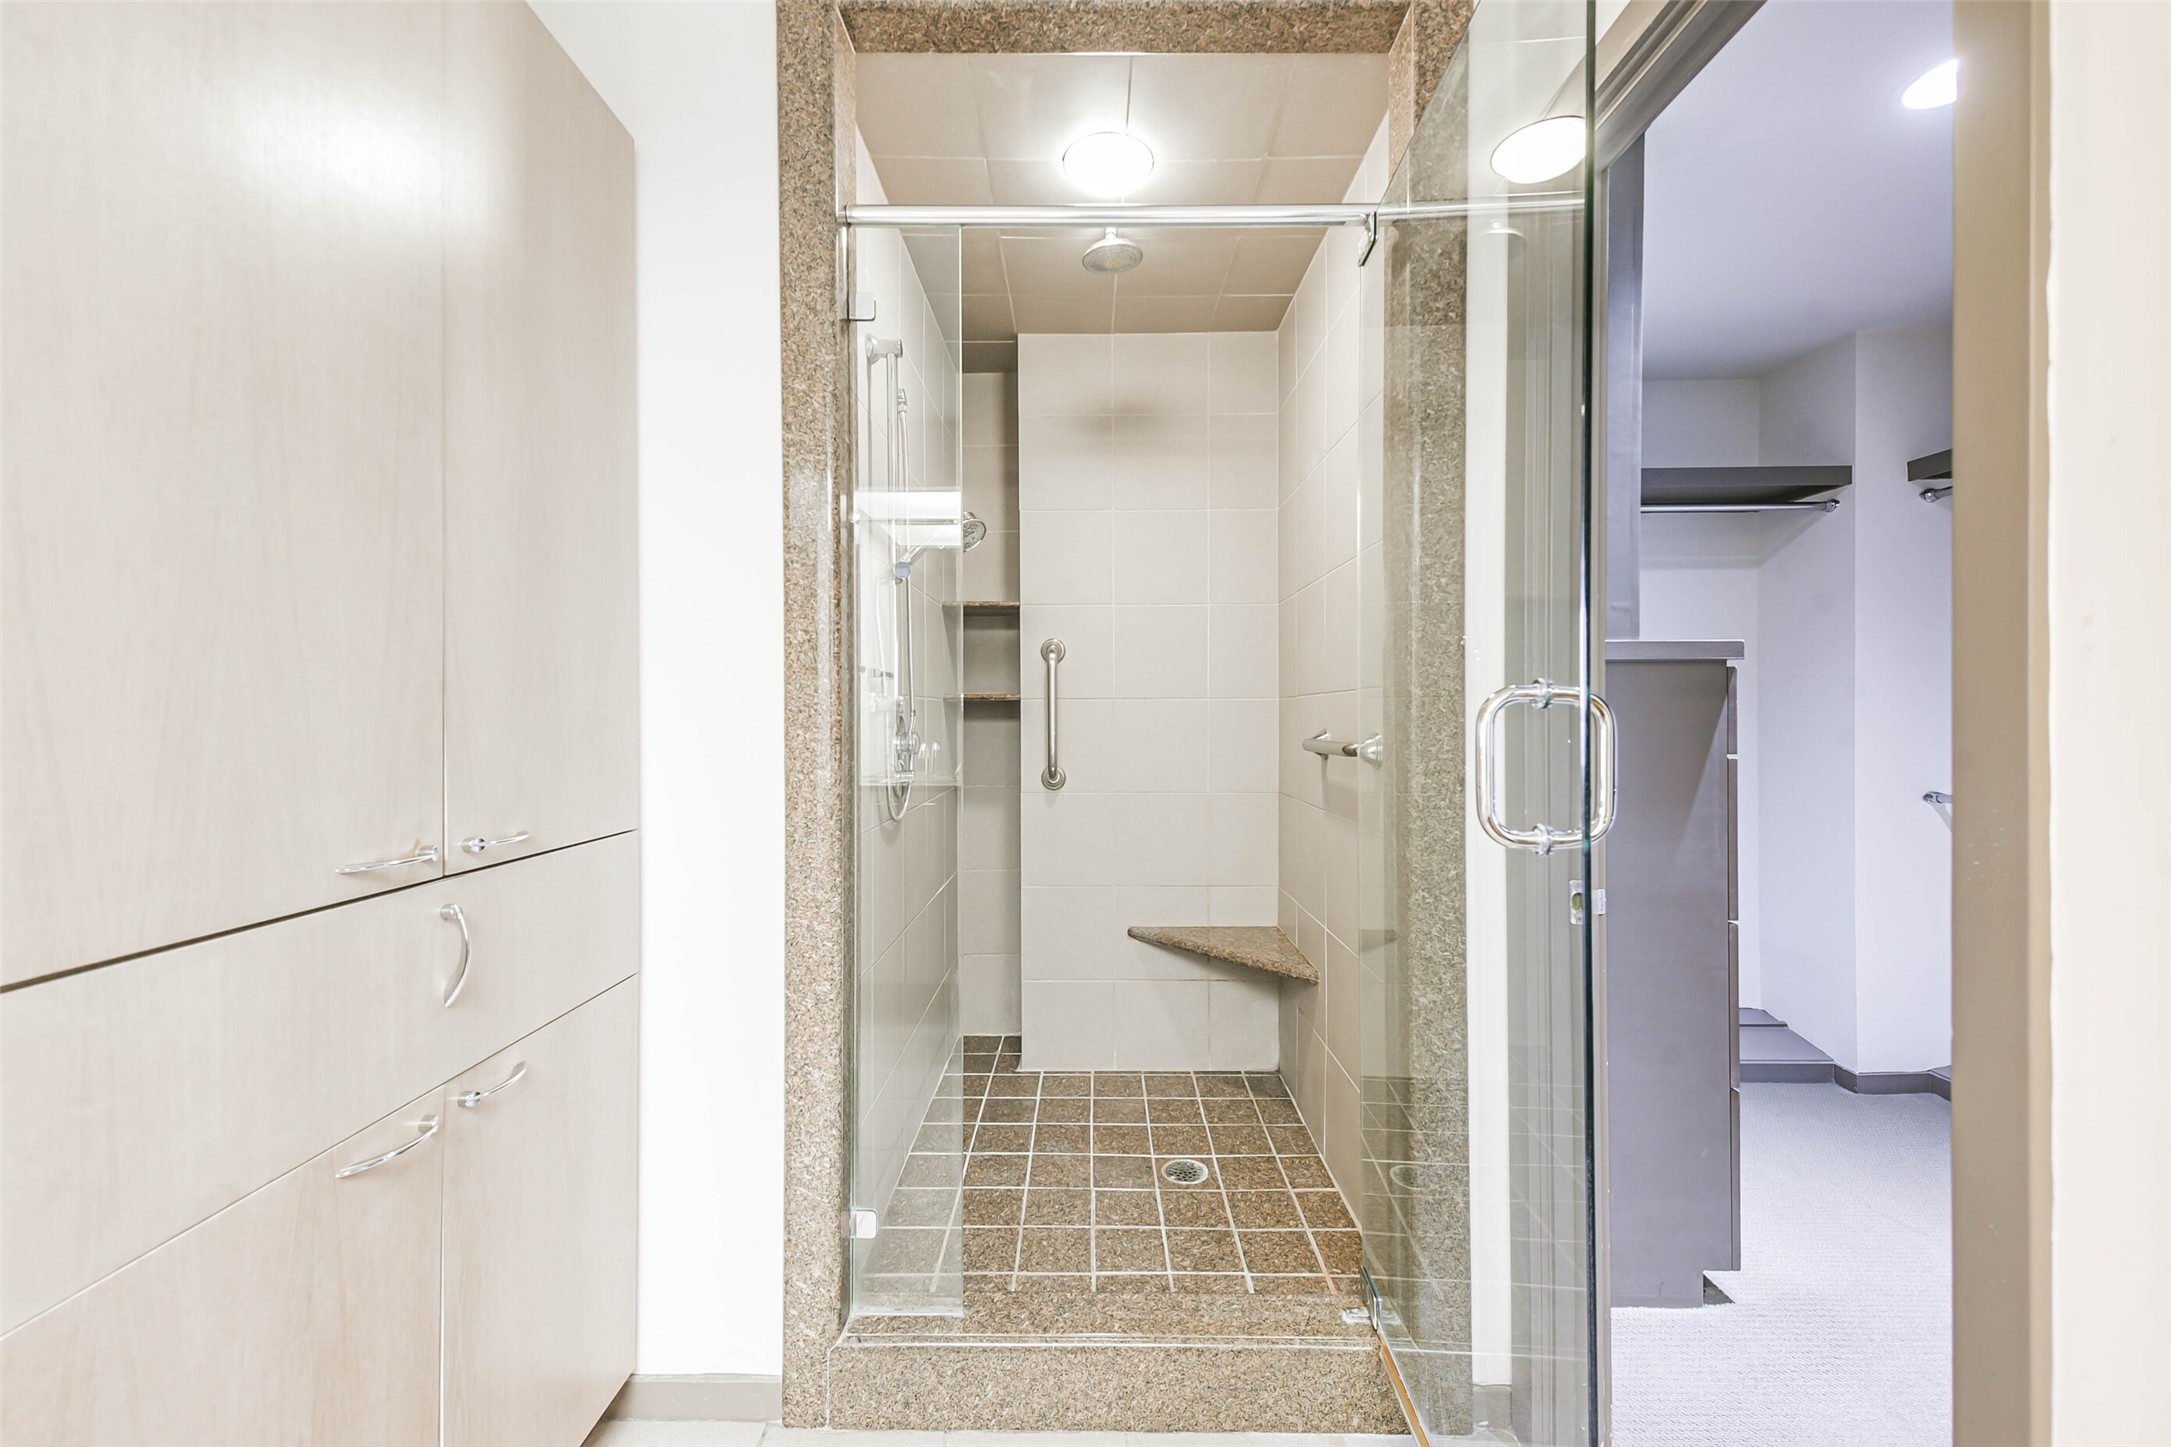 Ensuite primary bathroom has dual vanities, a soaking tub, separate glass-enclosed shower, and two walk-in closets.